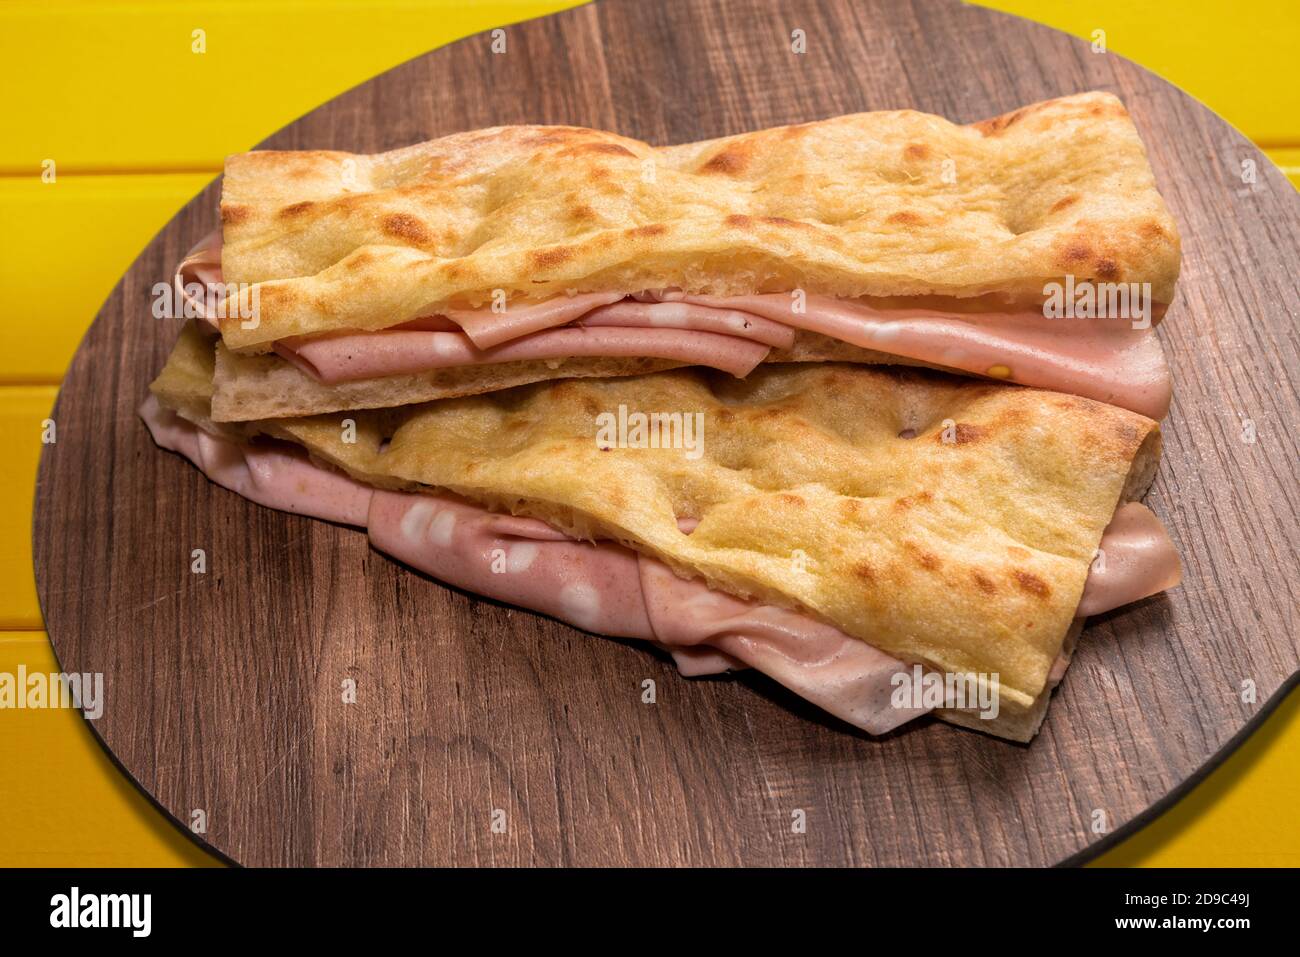 two focaccia bread sandwich filled with bologna mortadella on wooden cutting board and yellow background Stock Photo